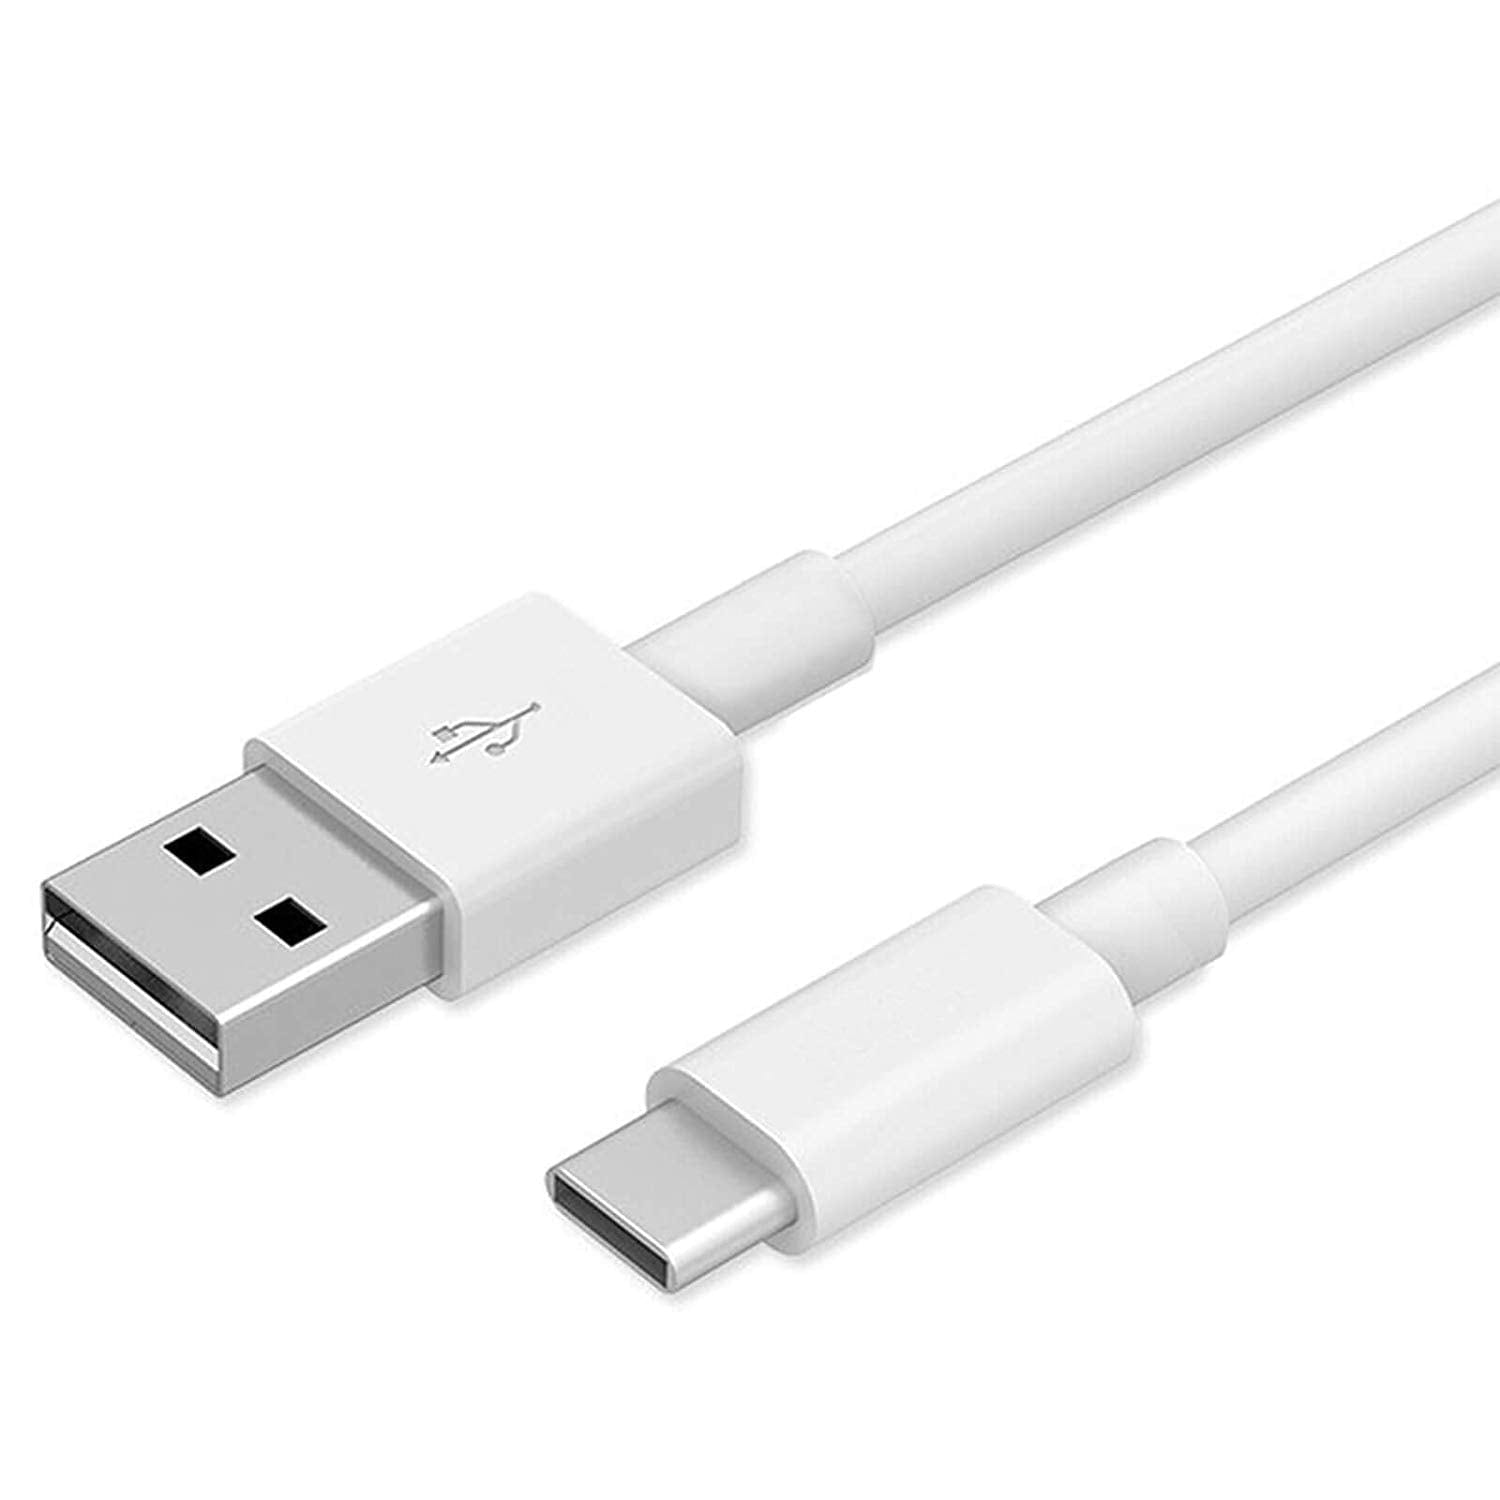 Samsung Galaxy A20e USB to Type C Charging Cable In Car White - 25 CM Short - SmartPhoneGadgetUK